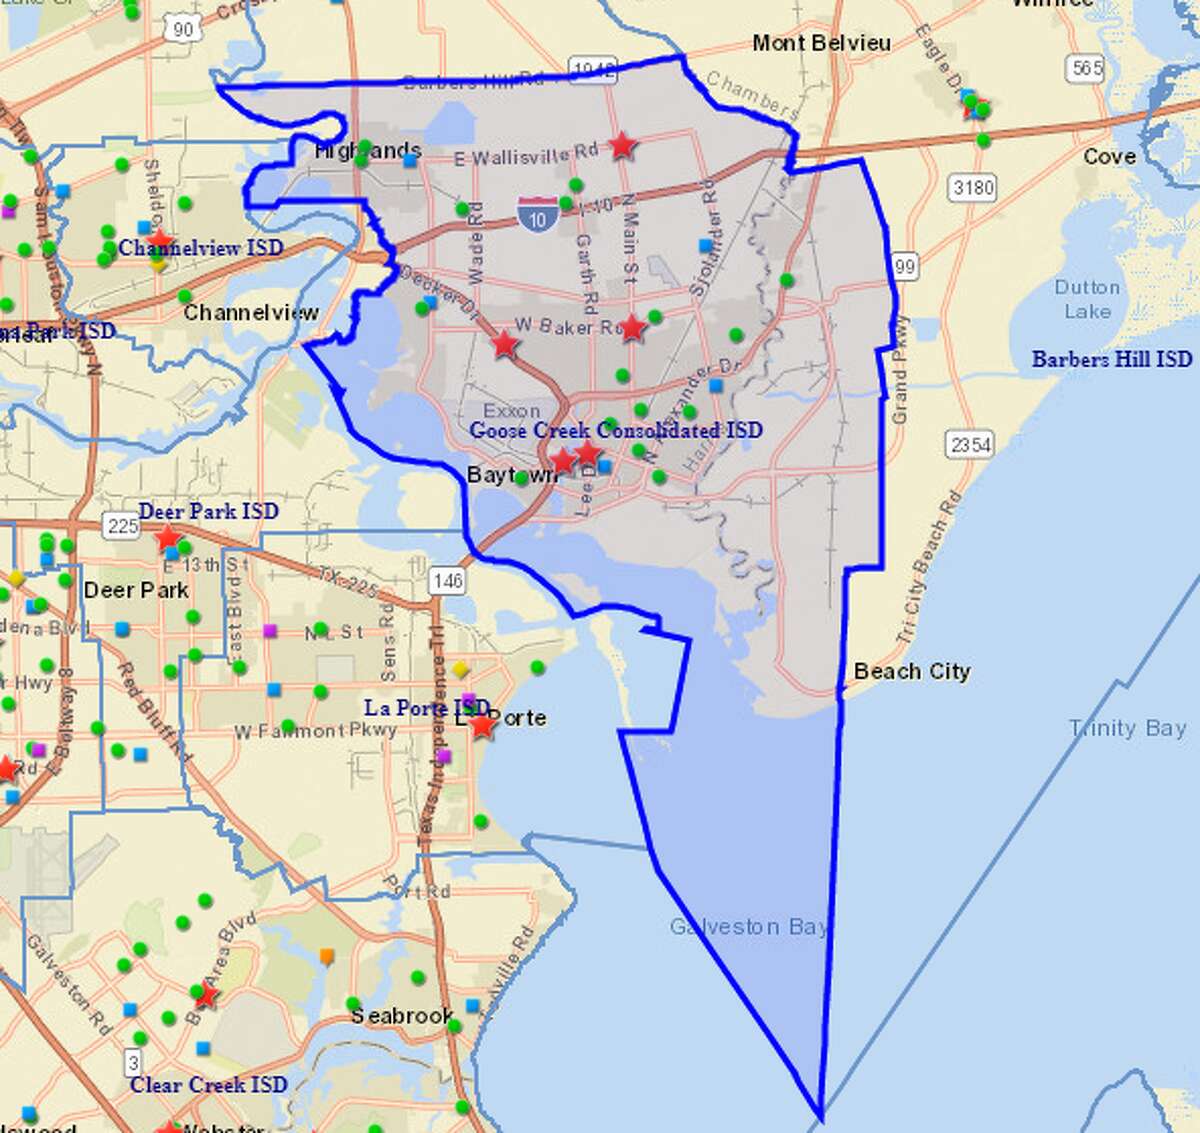 The Harris County school districts with the highest vaccine exemption rates